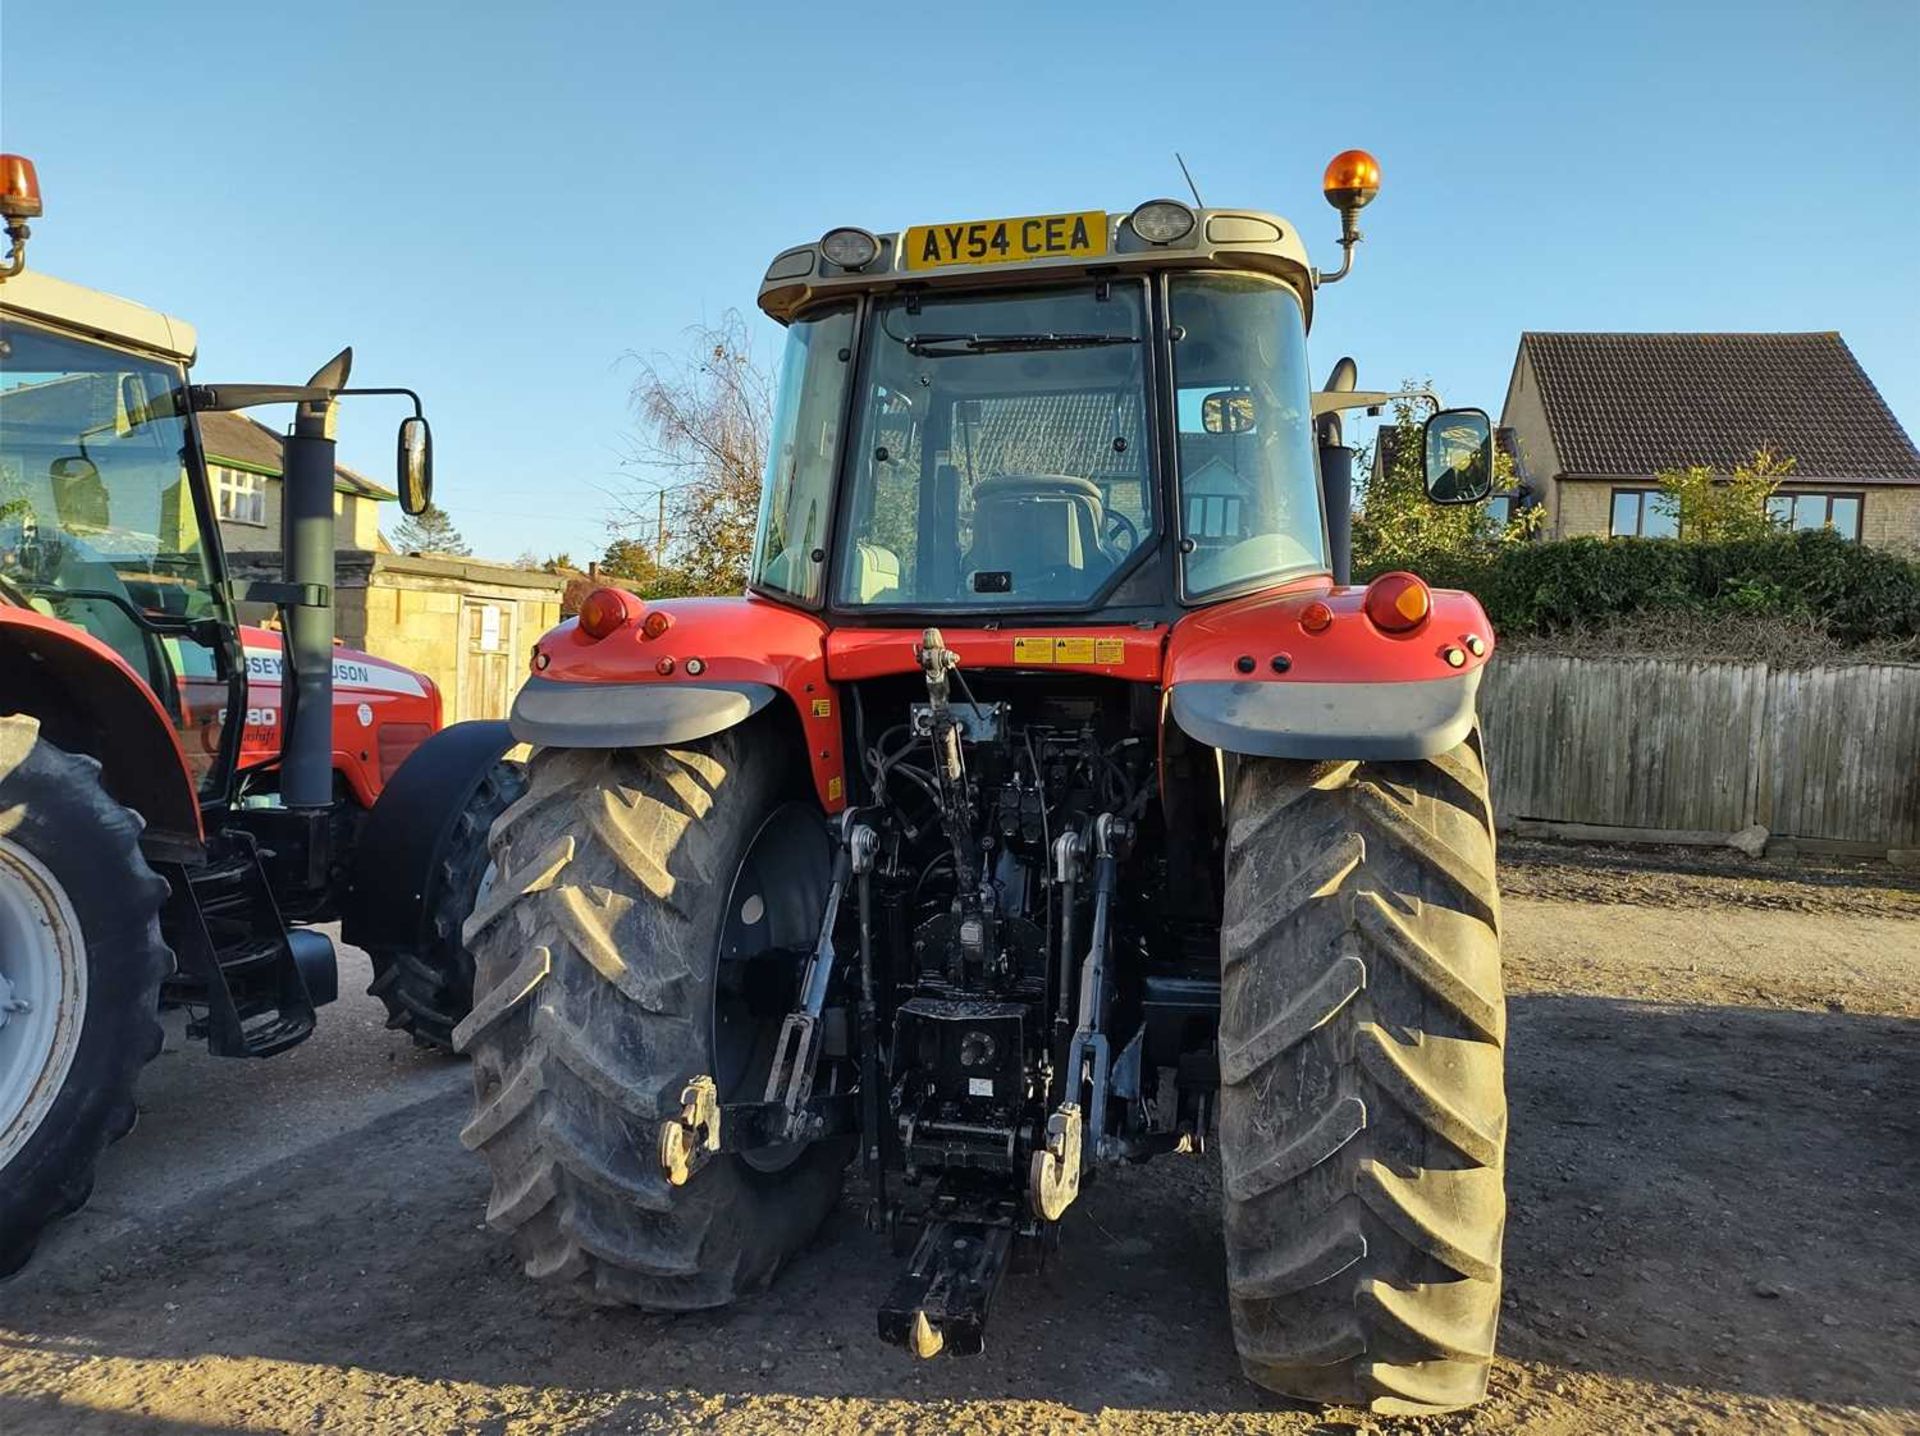 Massey Ferguson 6480 Dynashift Tractor with Opico Front Linkage. 5,799 Hrs. 3 Spools. Reg: AY54 CEA. - Image 5 of 8